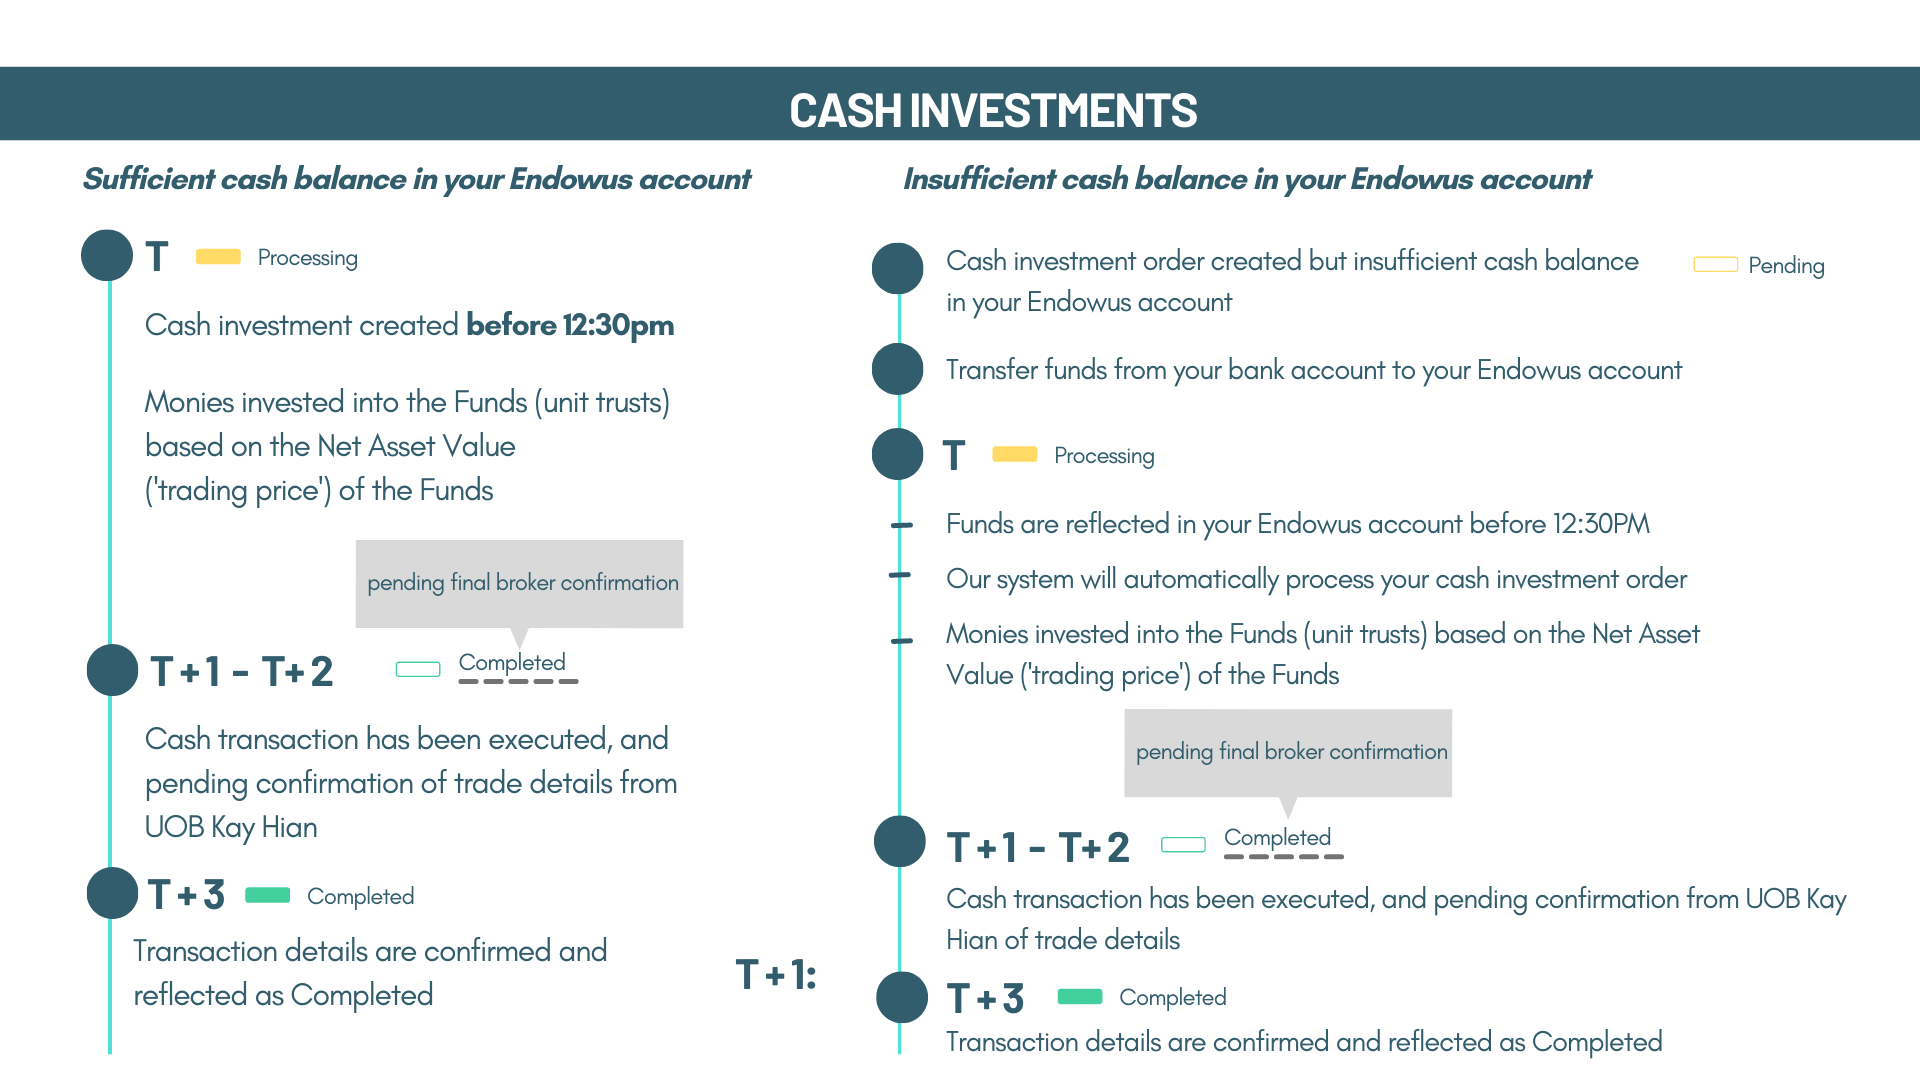 How long do Cash / CPF-OA / SRS investments take to complete? - Endowus FAQ